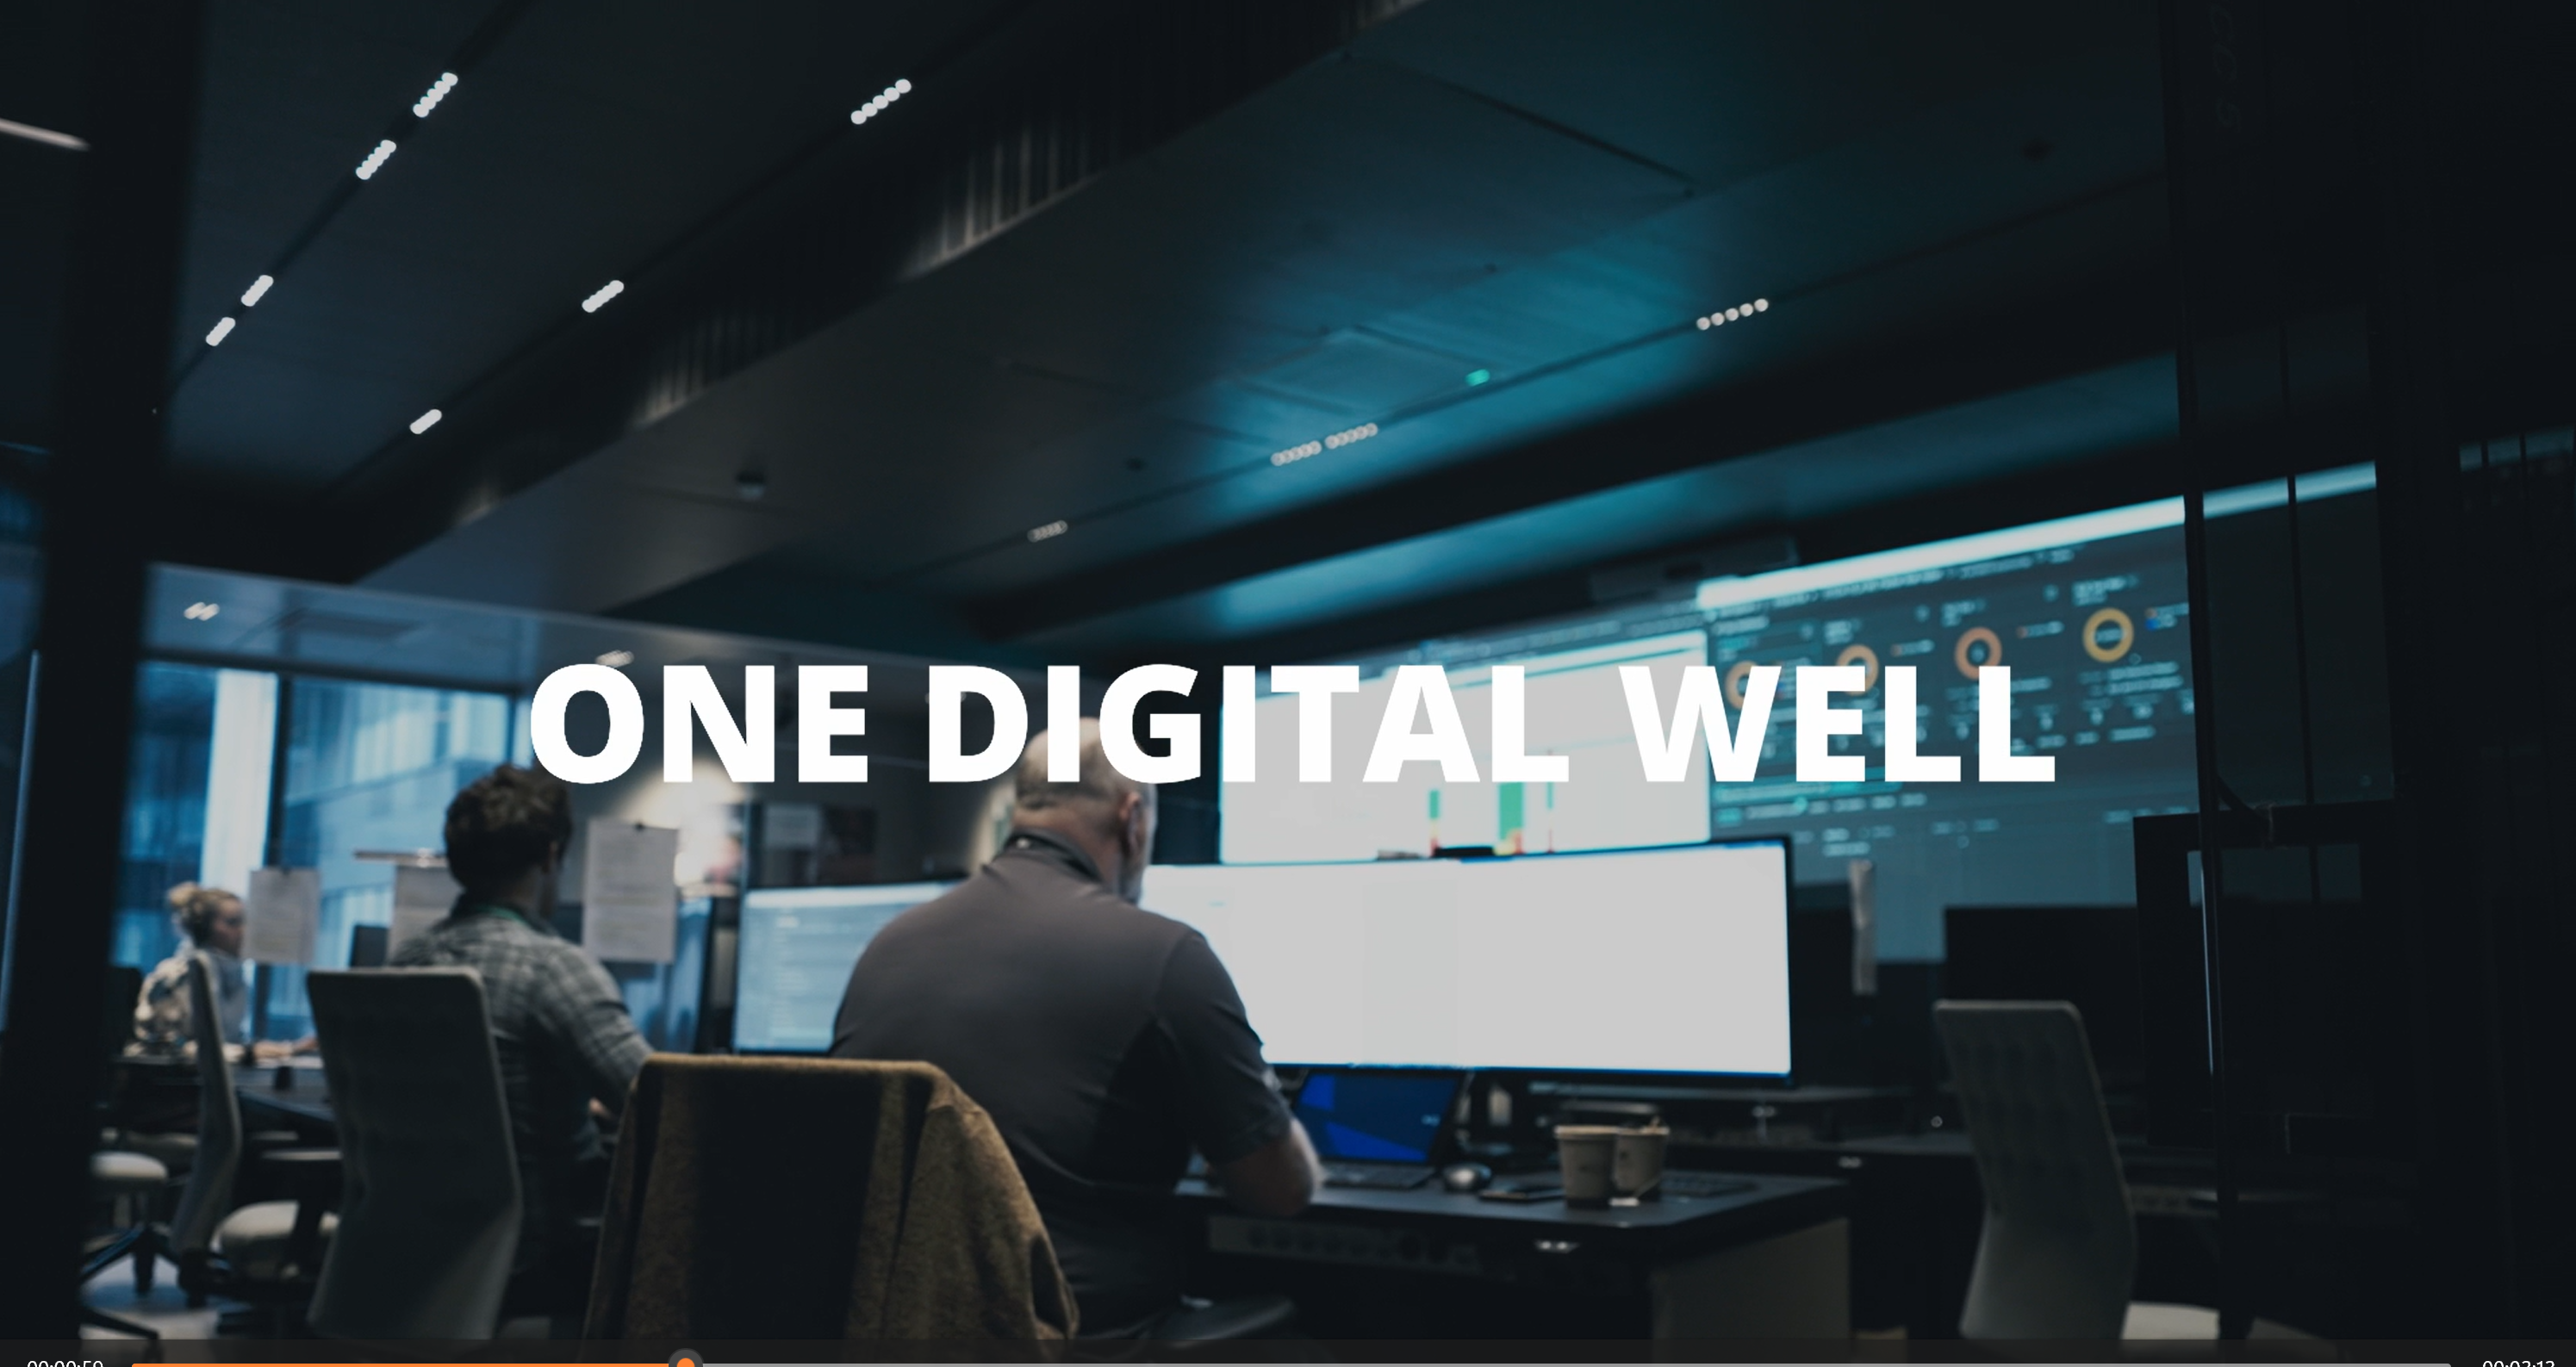 One Digital Well: The Full-Scale Digitalization of Drilling and Wells